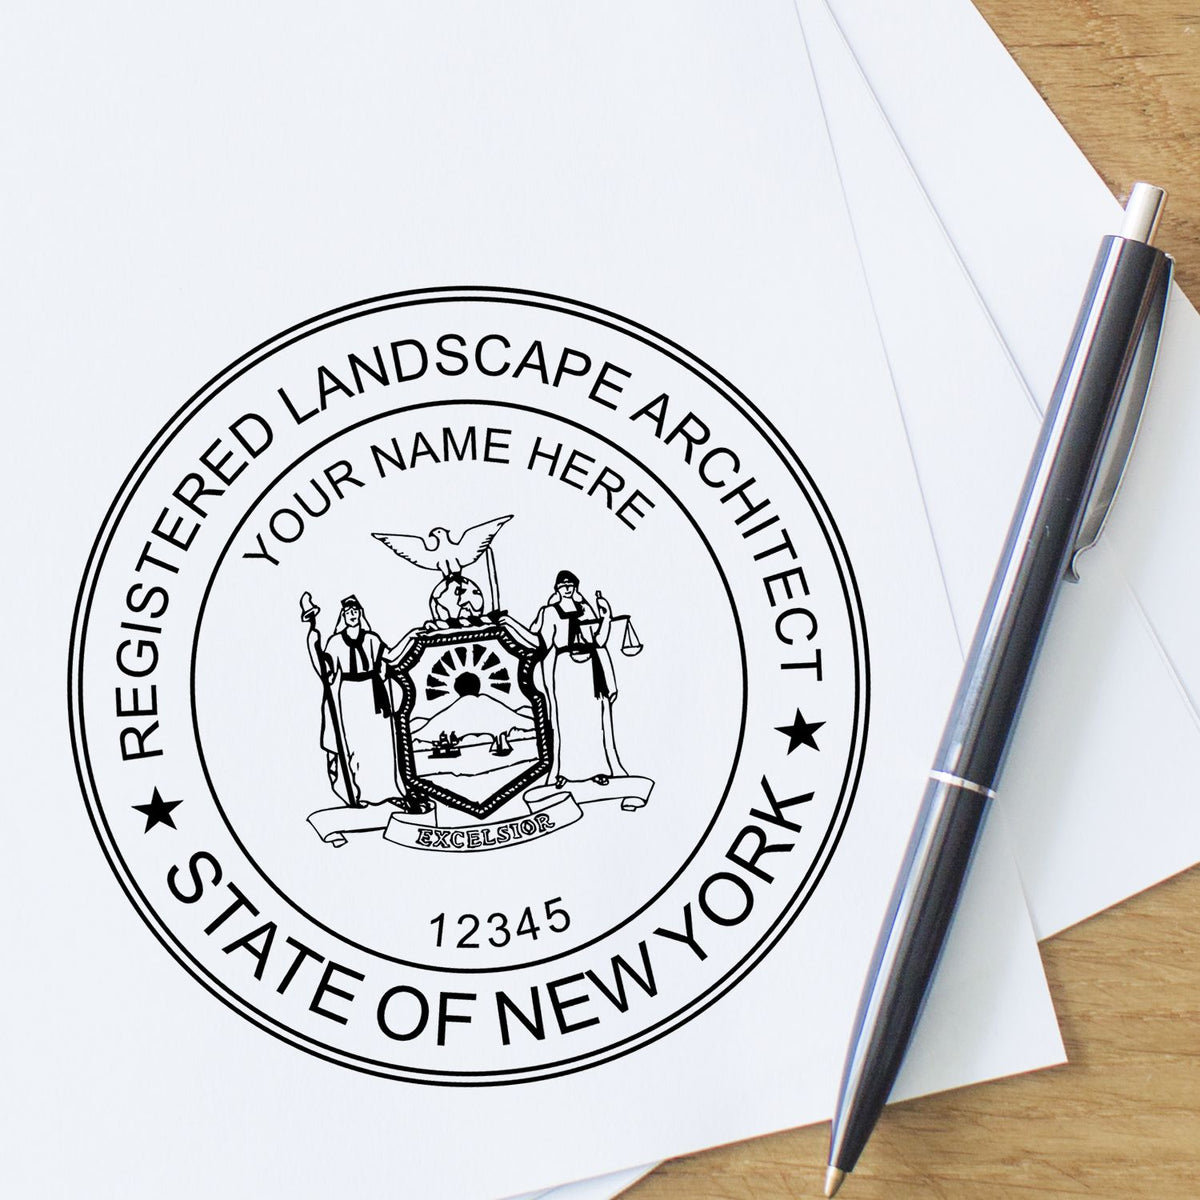 Slim Pre-Inked New York Landscape Architect Seal Stamp in use photo showing a stamped imprint of the Slim Pre-Inked New York Landscape Architect Seal Stamp